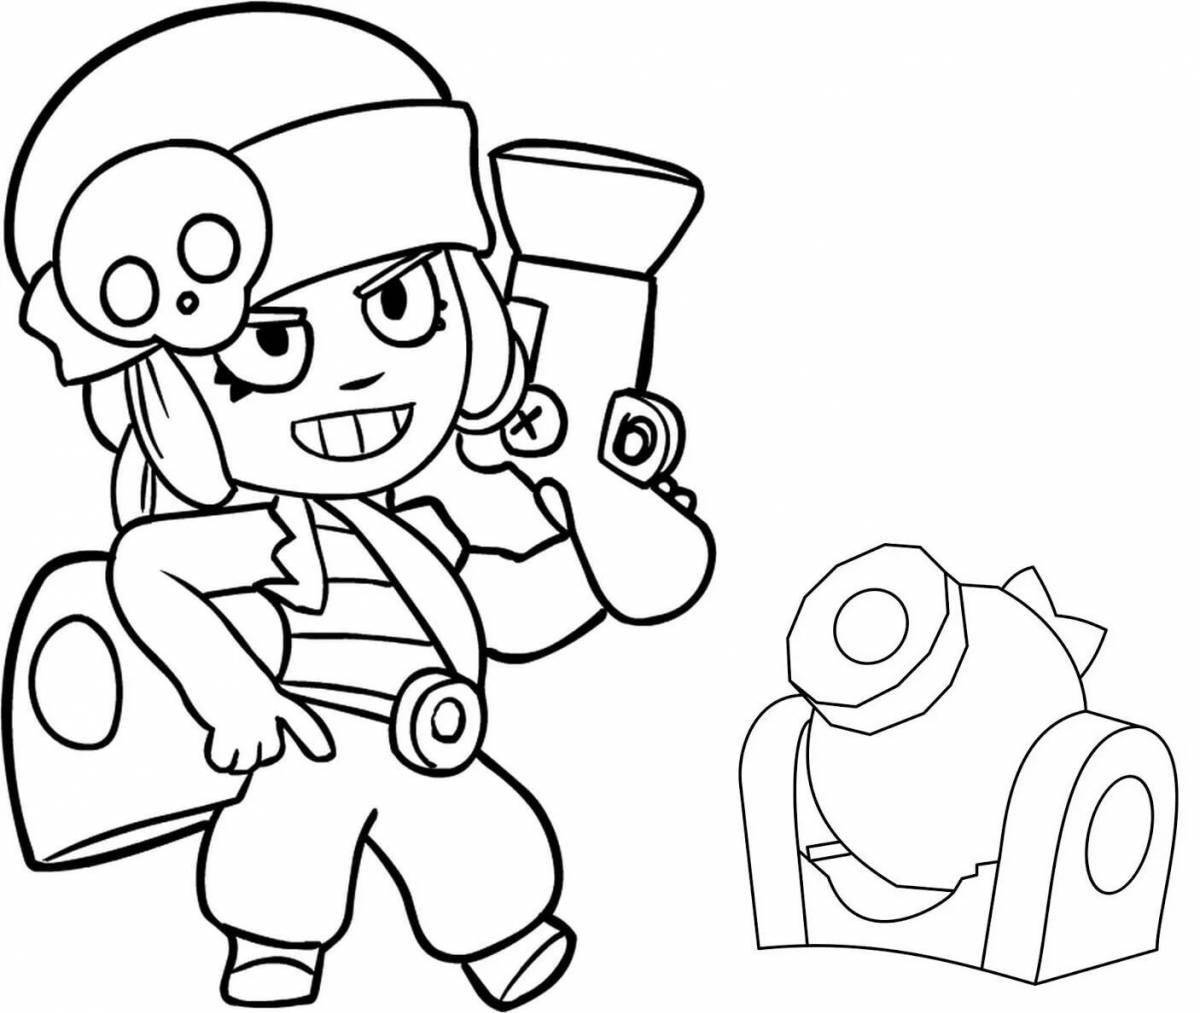 Colette from brawl stars #1